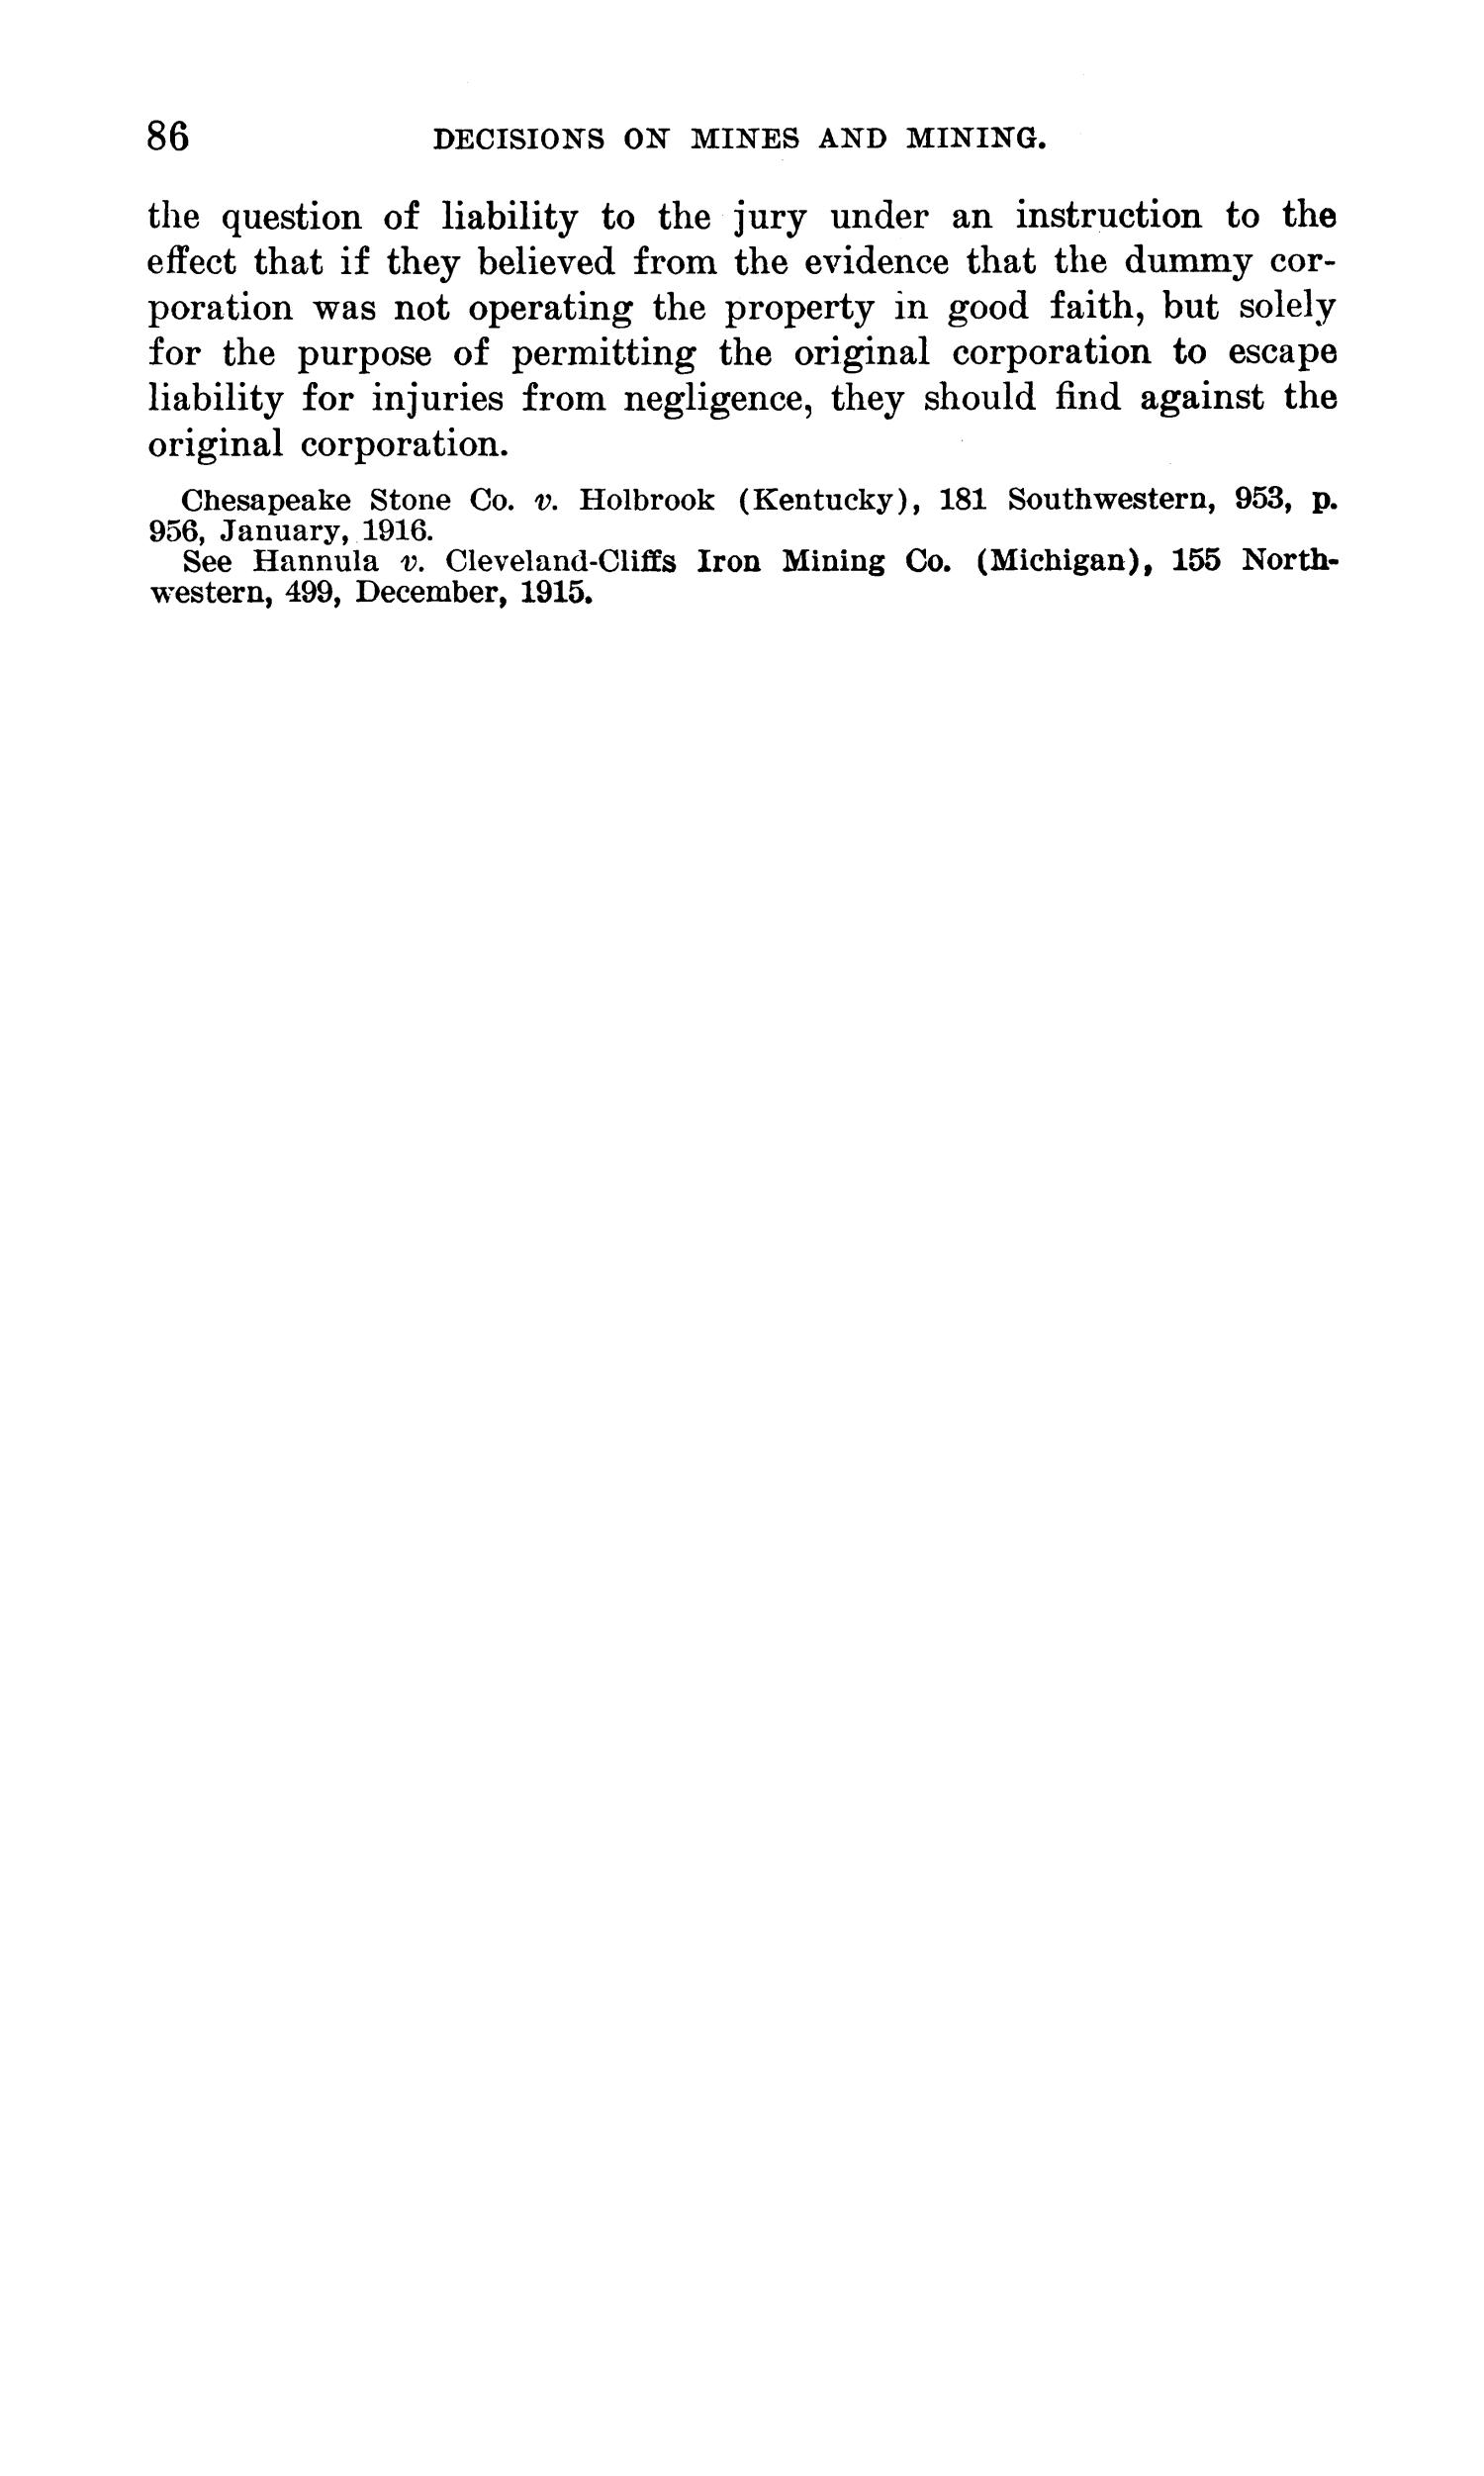 Abstracts of Current Decisions on Mines and Mining: January to April, 1916
                                                
                                                    86
                                                